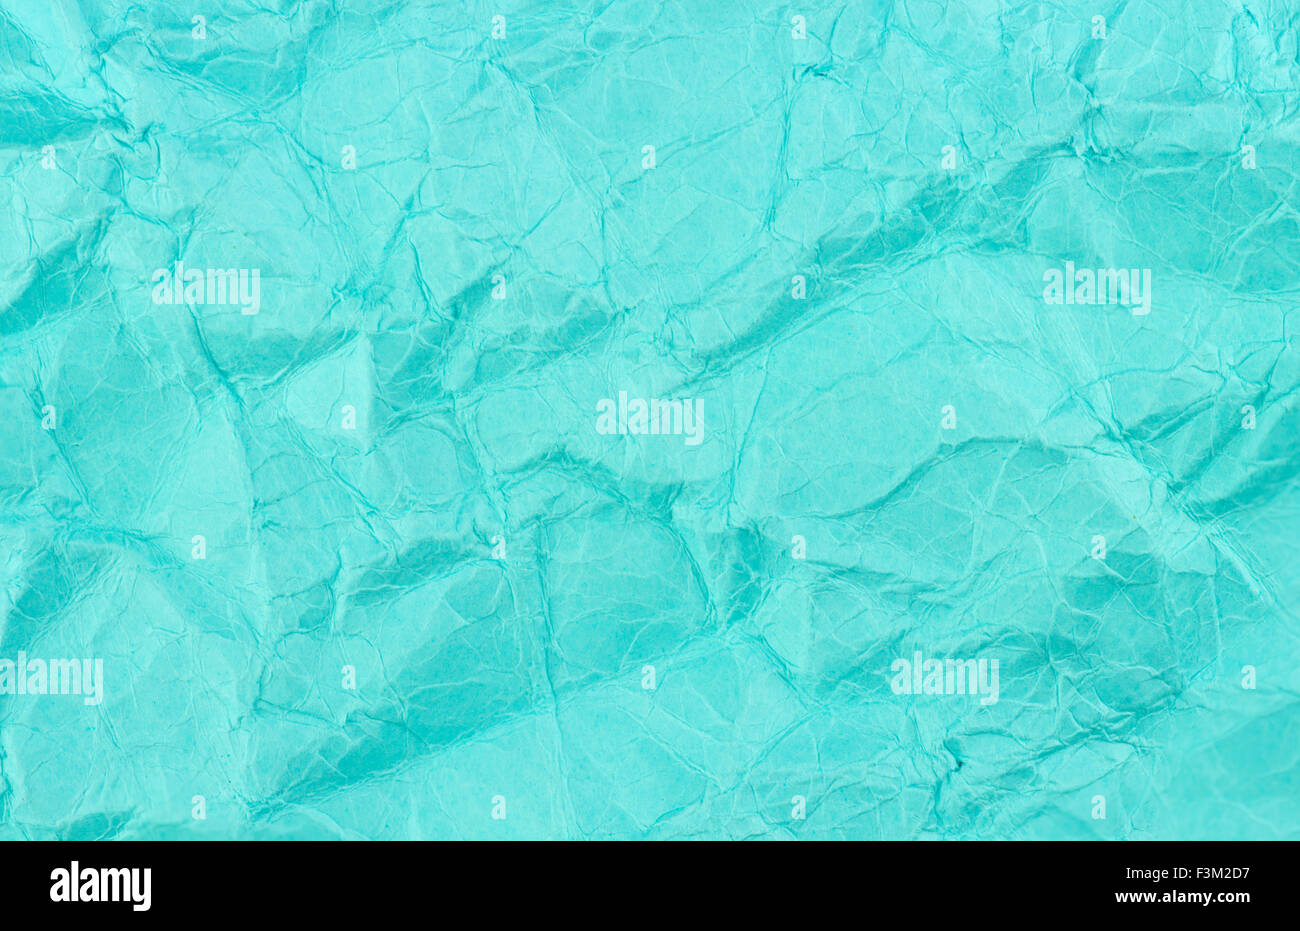 Blue teal crumbled recycled paper background texture Stock Photo